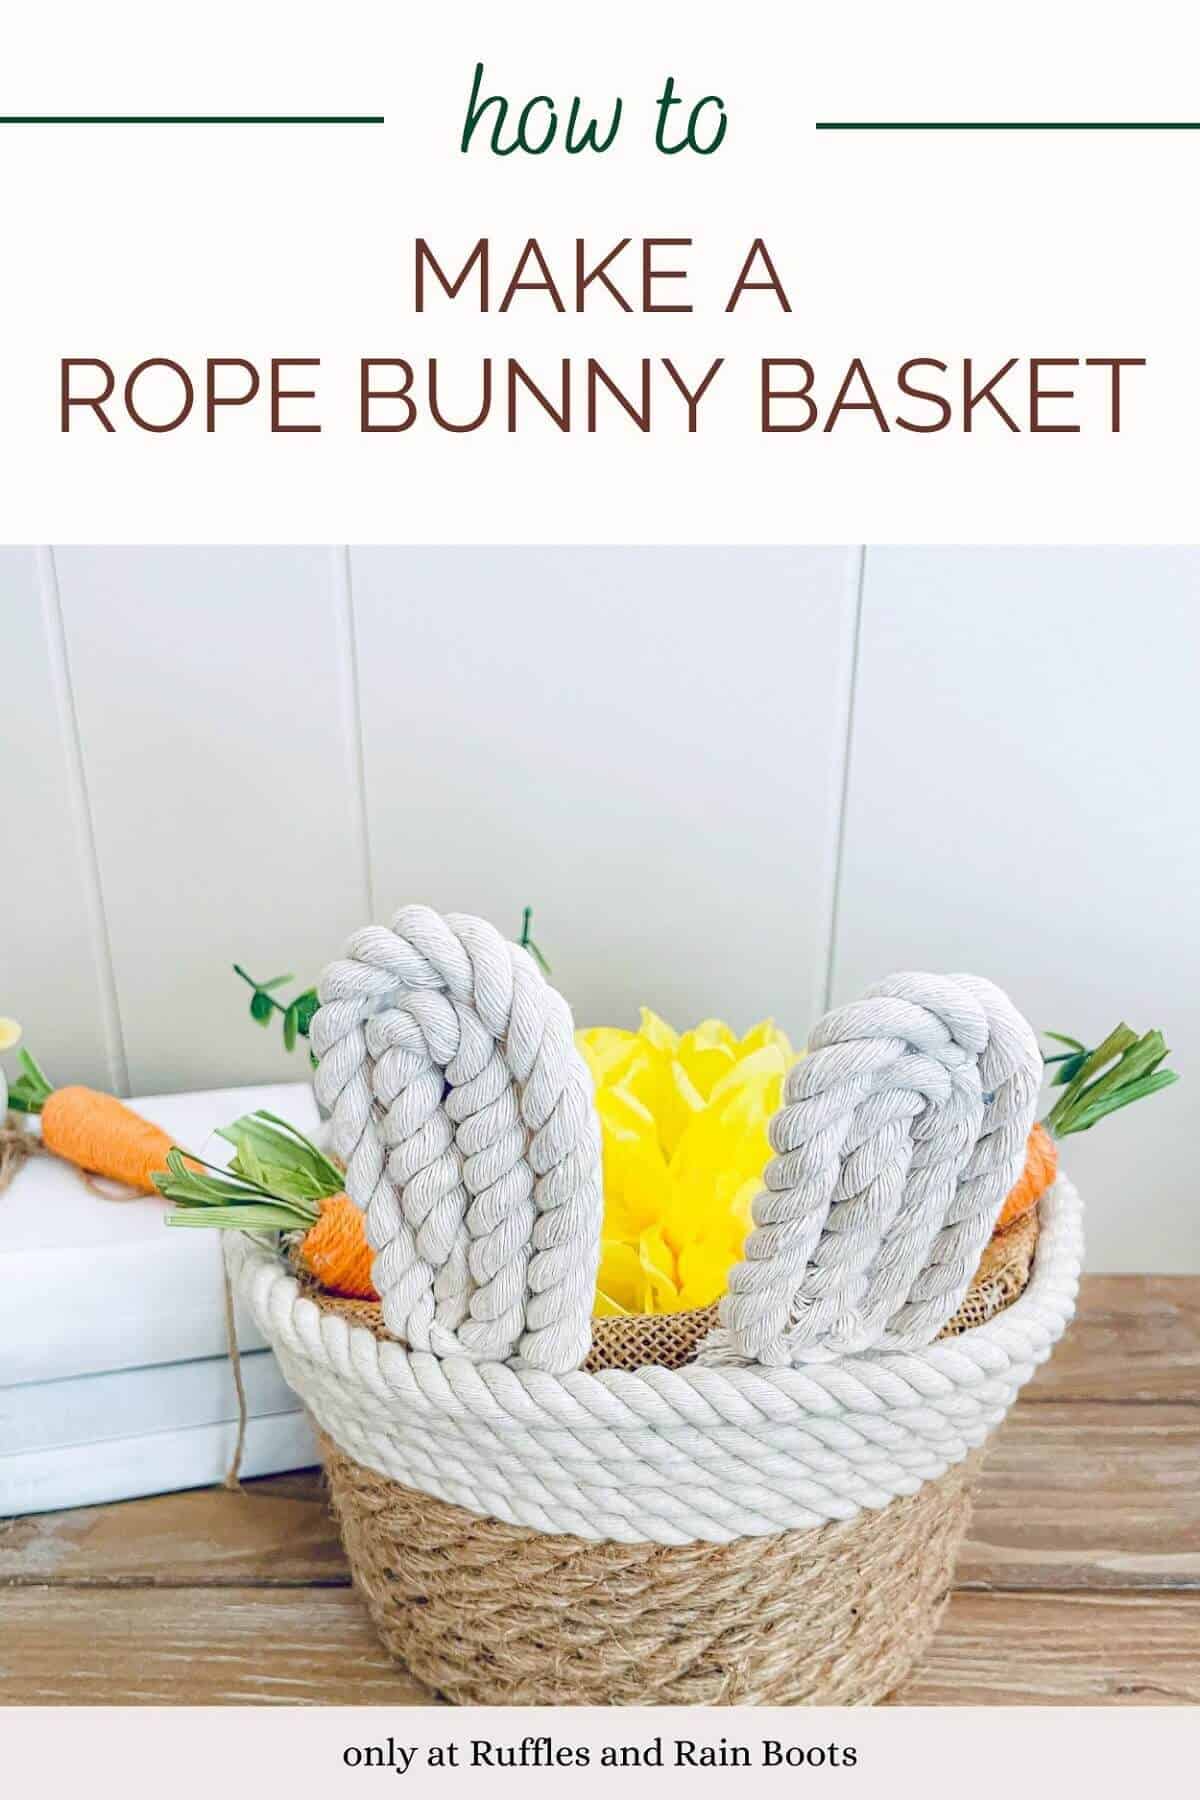 Farmhouse Rope Bunny Basket filled with yellow flowers and carrots with a white background next to white wooden books with carrots on it on a weathered wood surface.